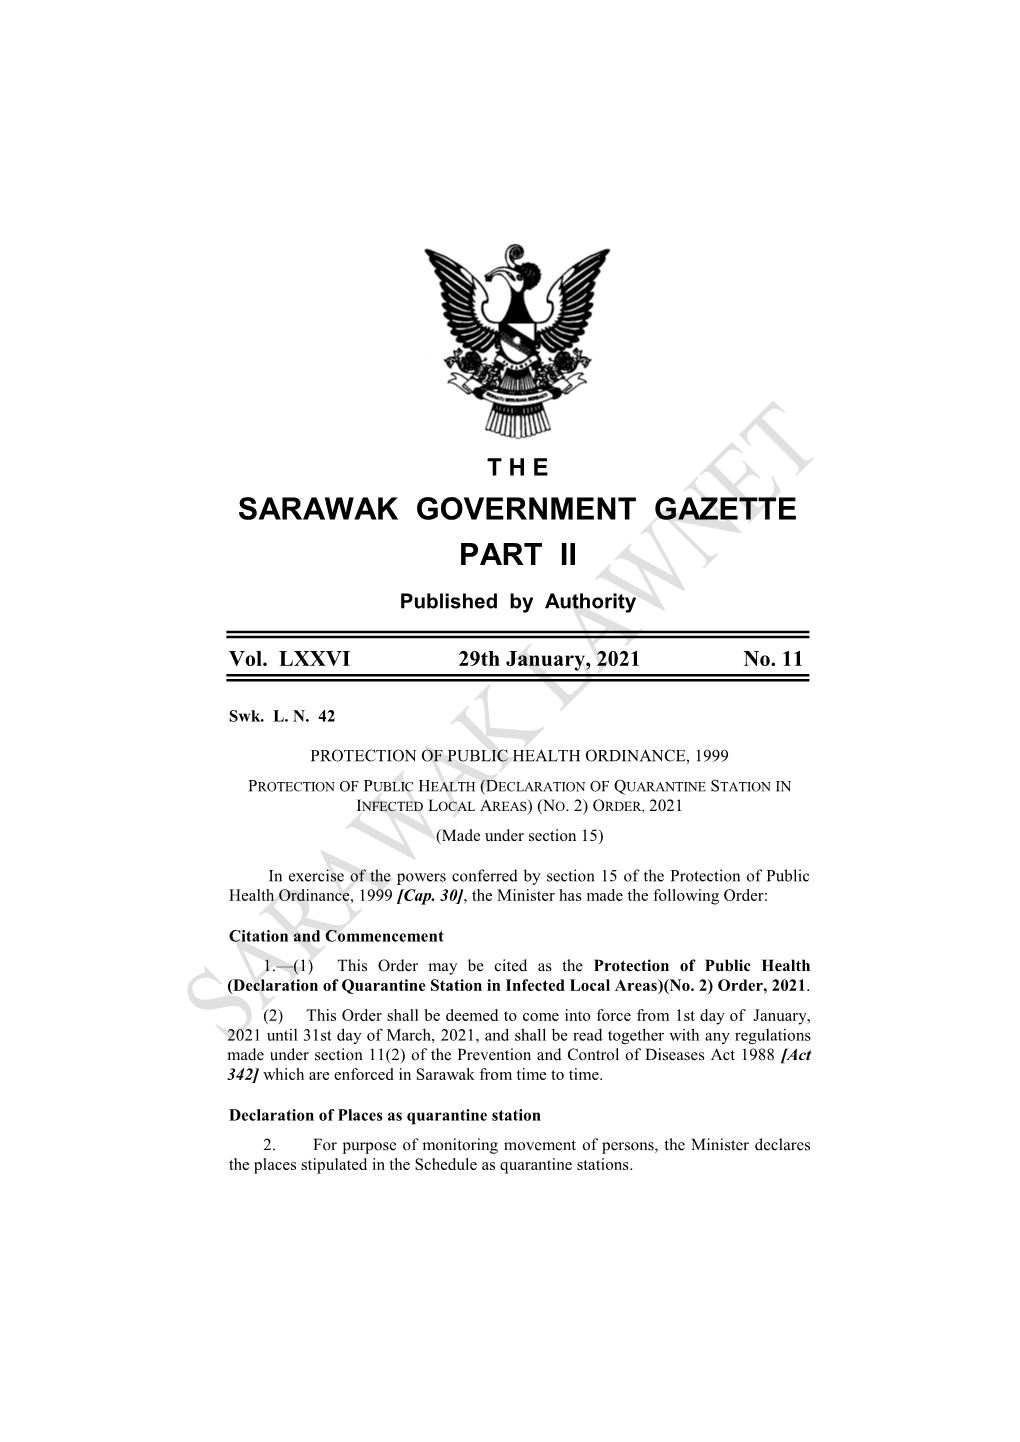 SARAWAK GOVERNMENT GAZETTE PART II Published by Authority